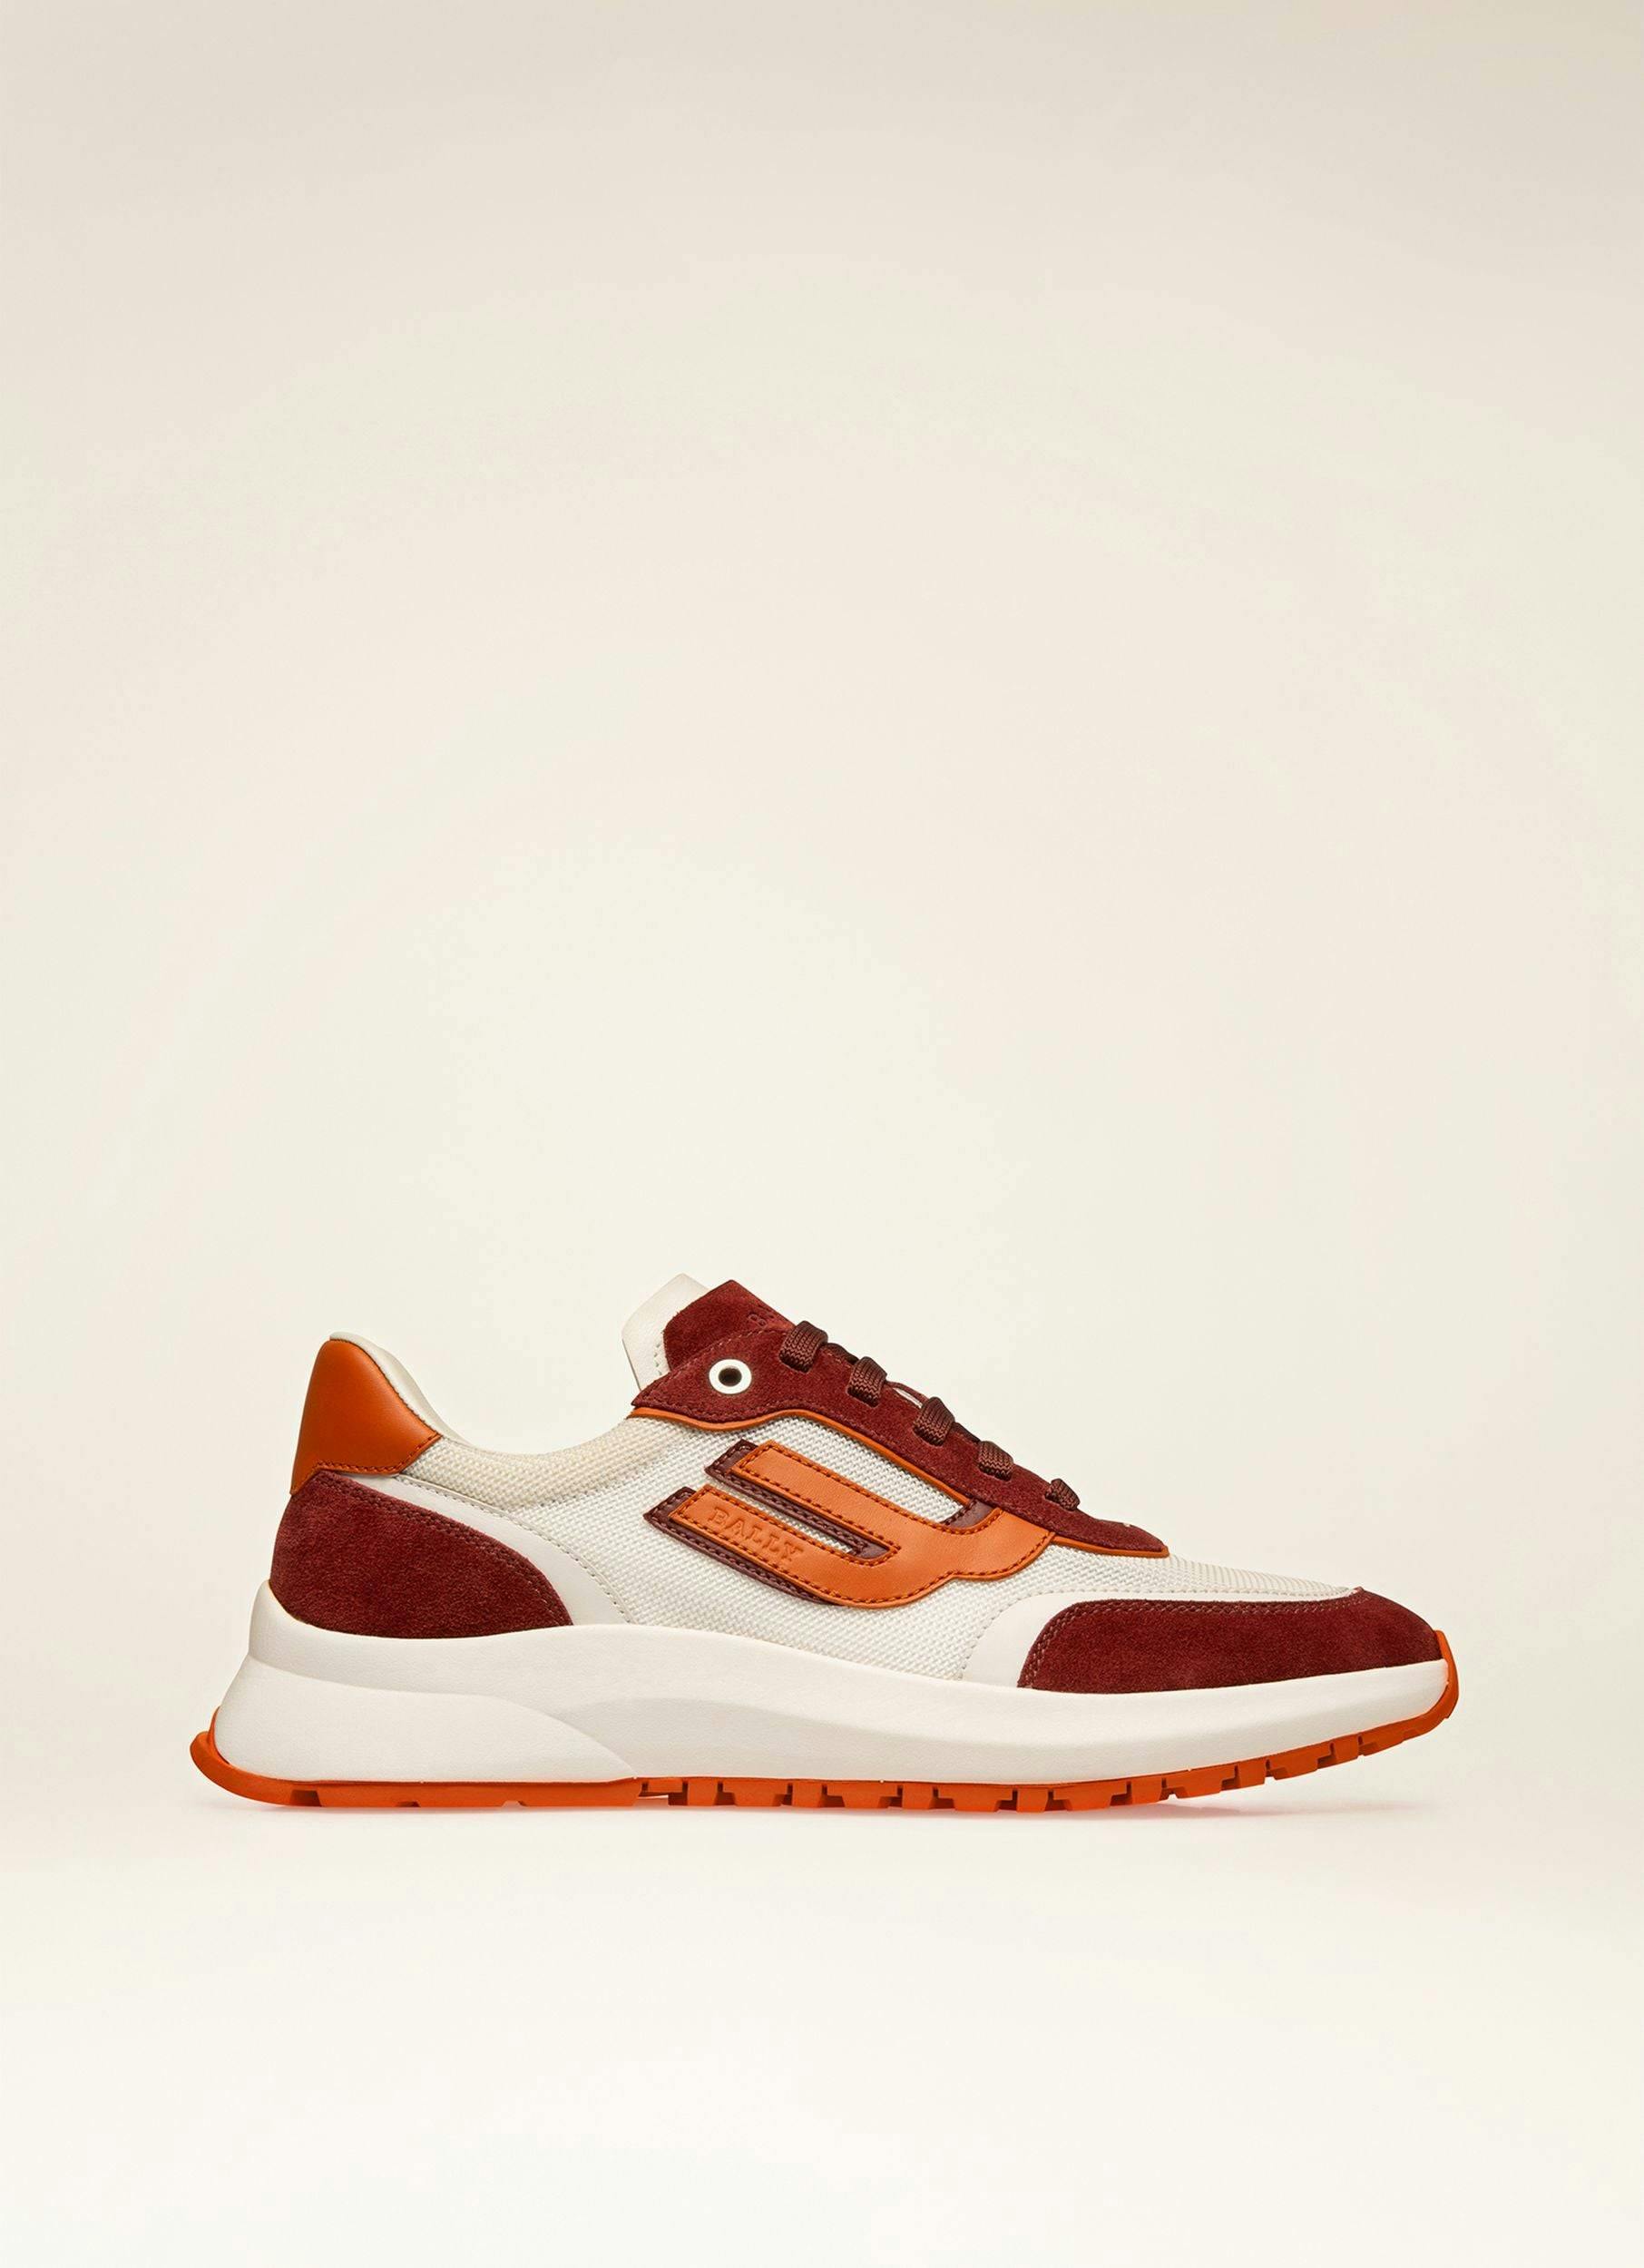 Demmy Mesh & Leather Sneakers In Heritage Red & White - Men's - Bally - 01